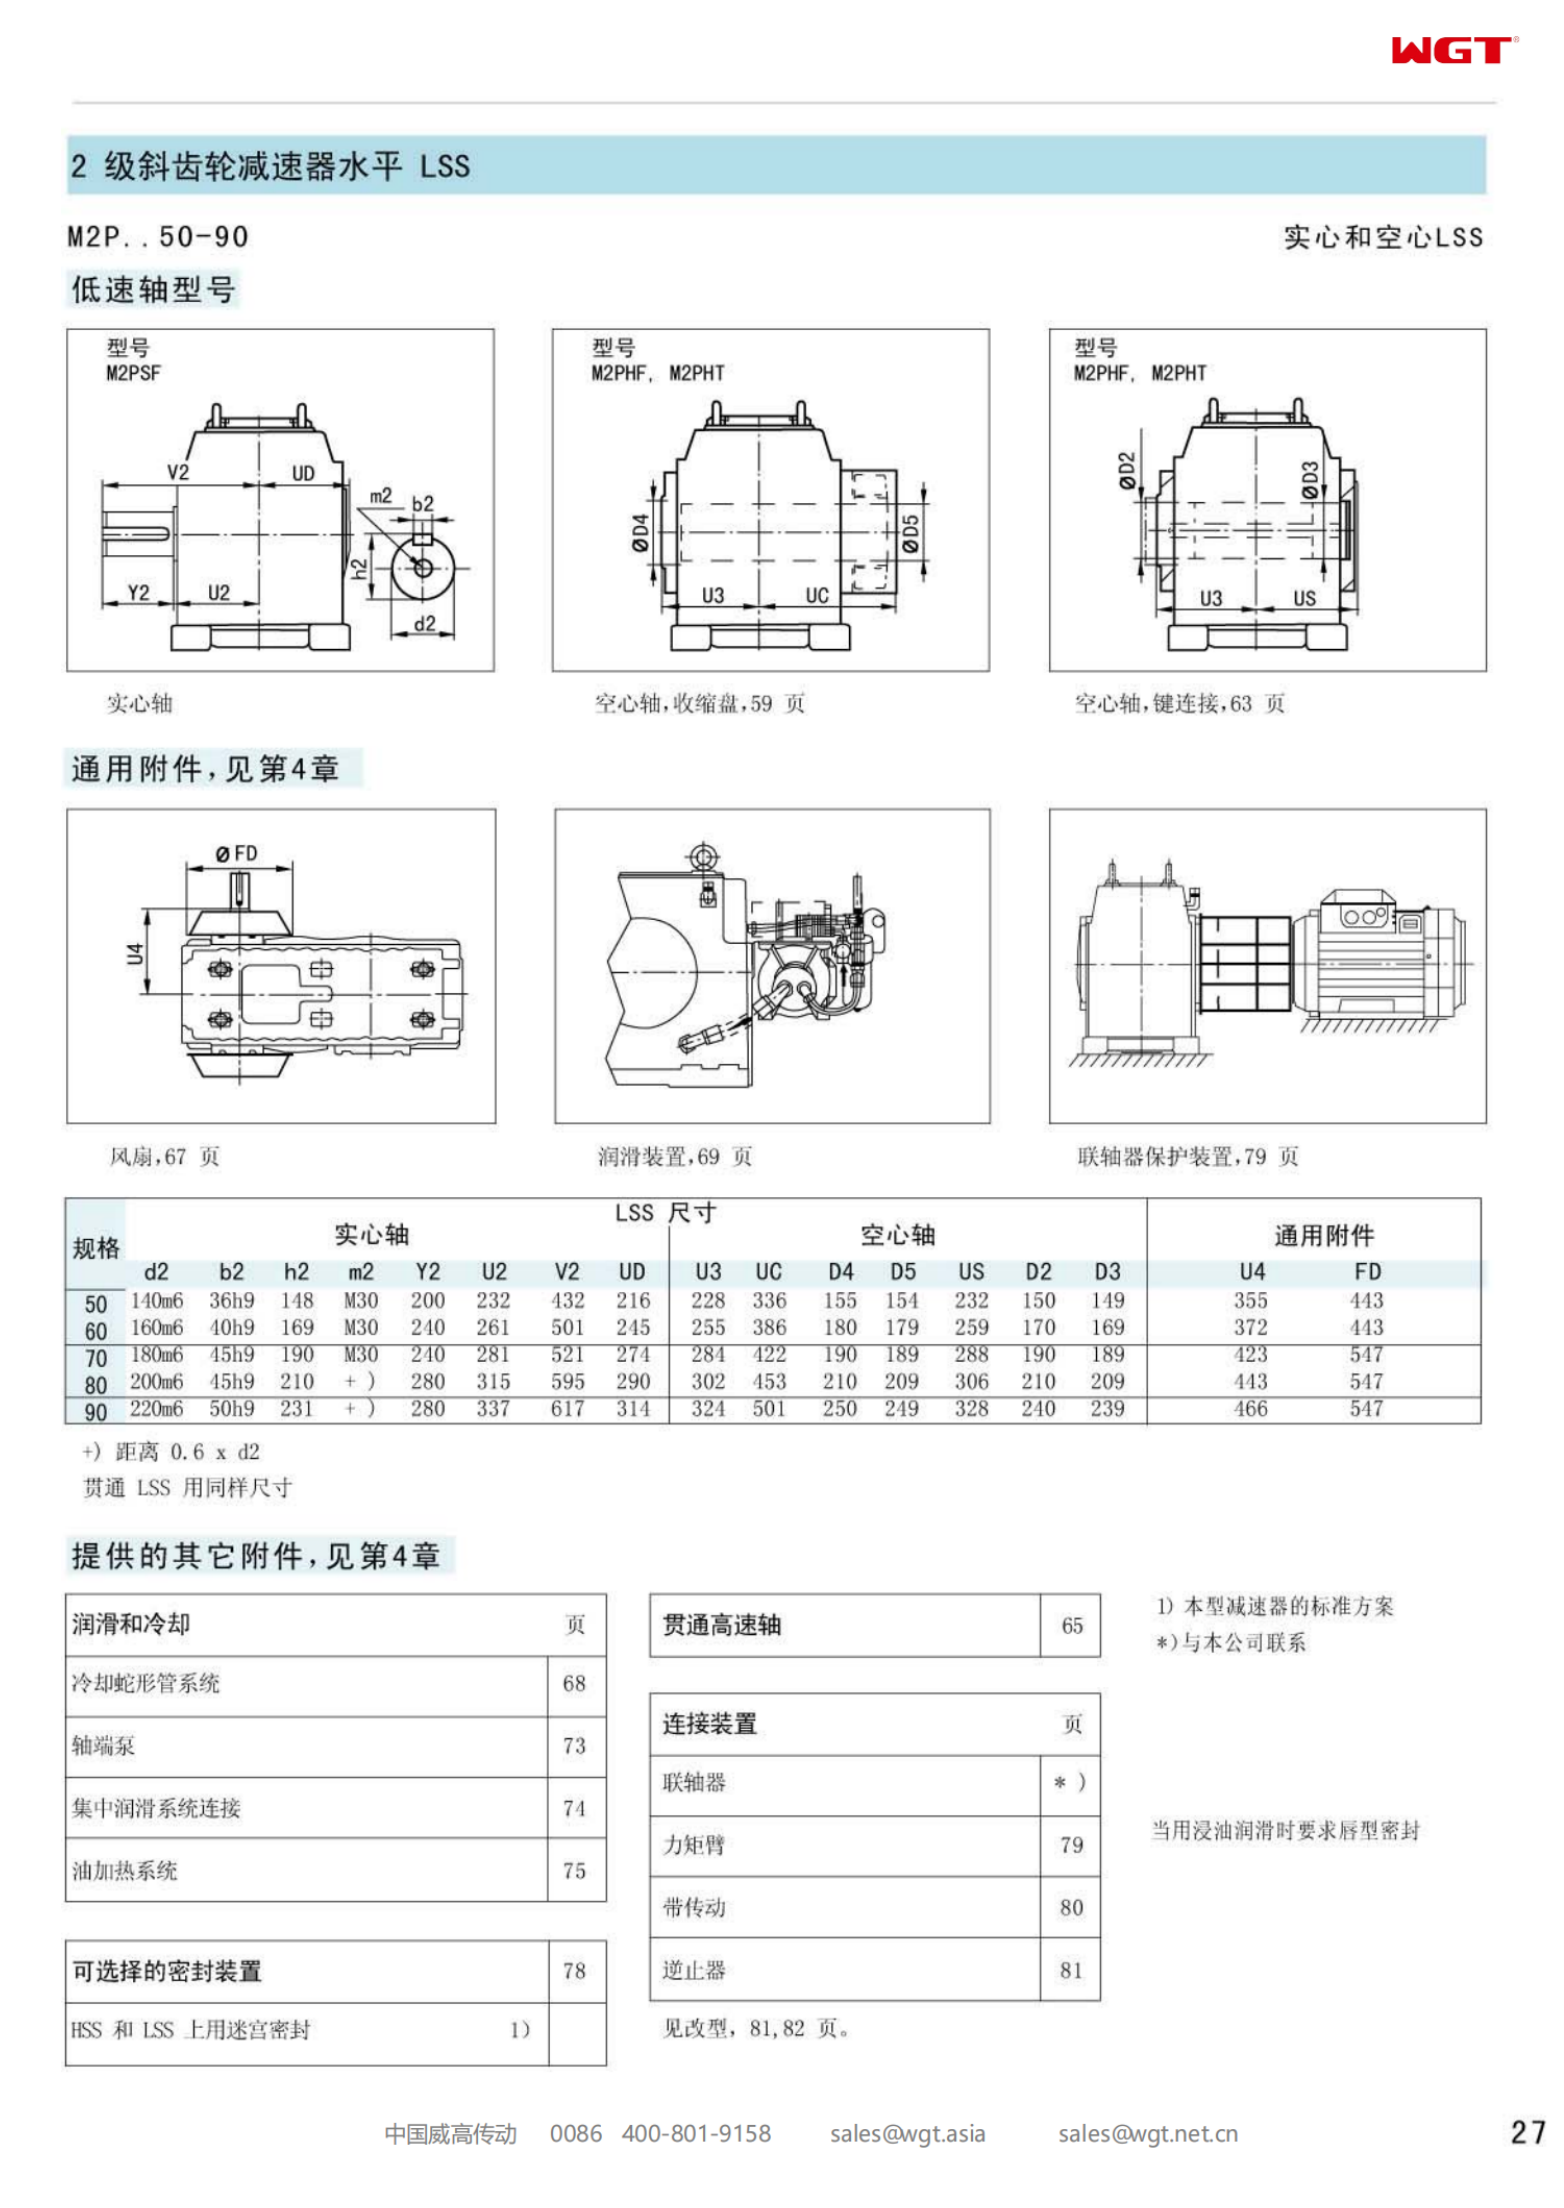 M2PHT70 Replace_SEW_M_Series Gearbox